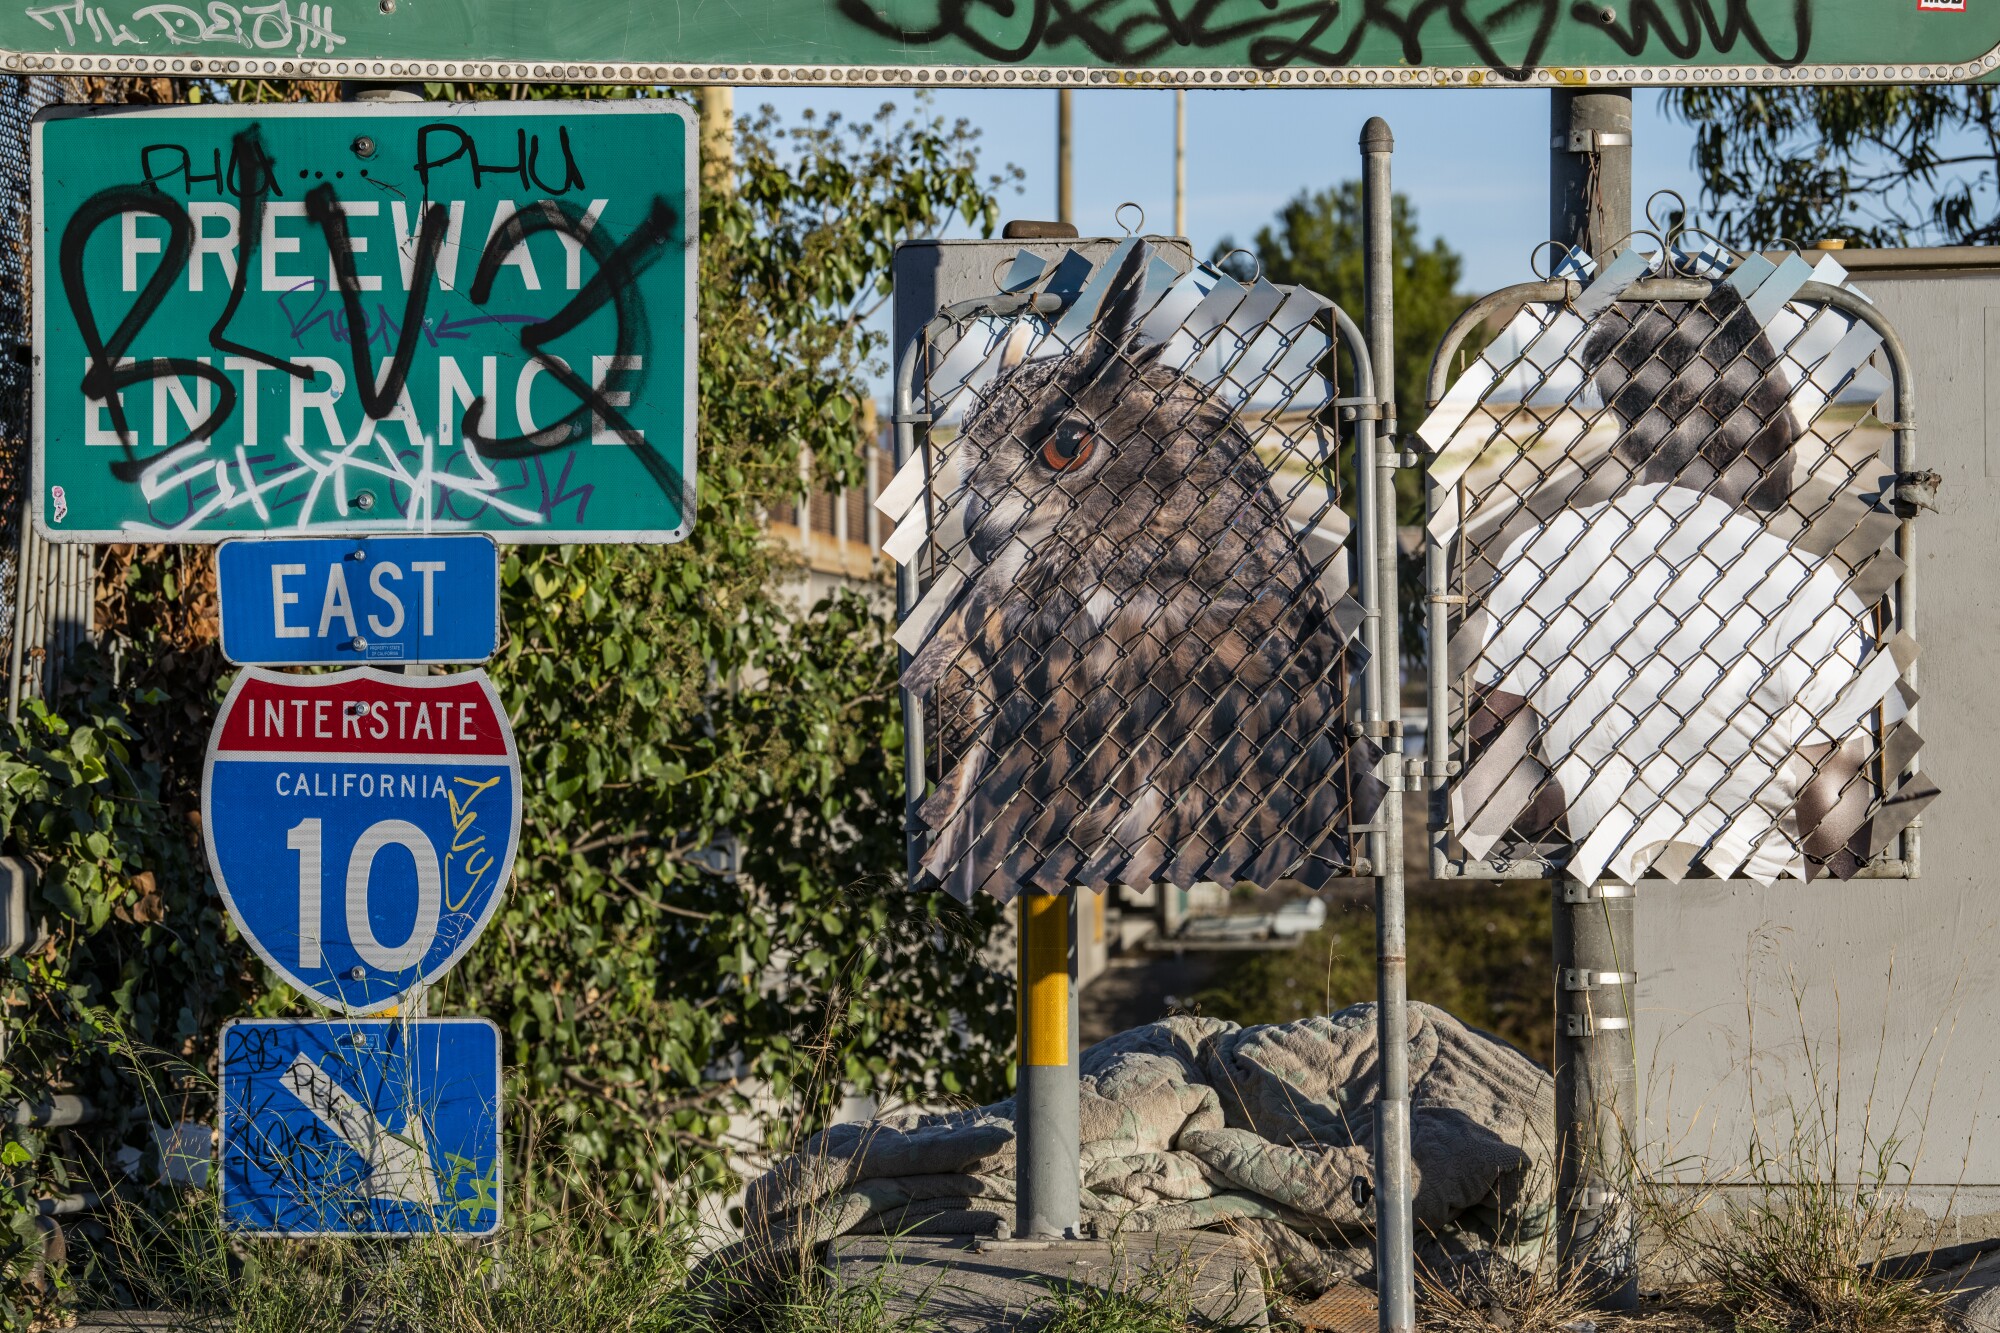 Portraits of a great horned owl and a person at an entrance to the eastbound 10 freeway.